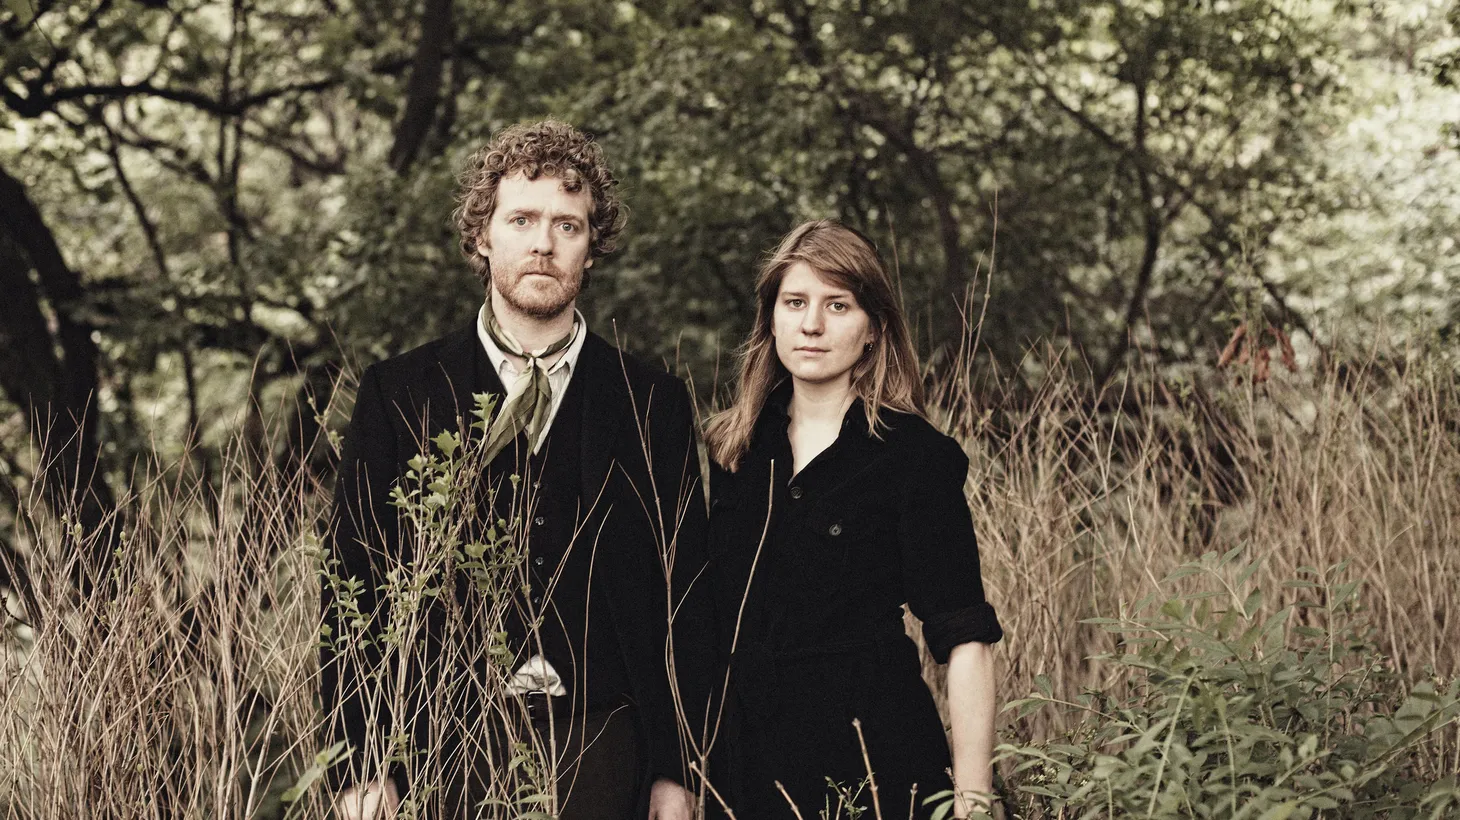 Academy Award winners Marketa Irglova and Glen Hansard follow up on the success of their film “Once” with a new work from their project The Swell Season.  They'll join guest host Chris Douridas in live performance on Morning Becomes Eclectic at 11:15am.